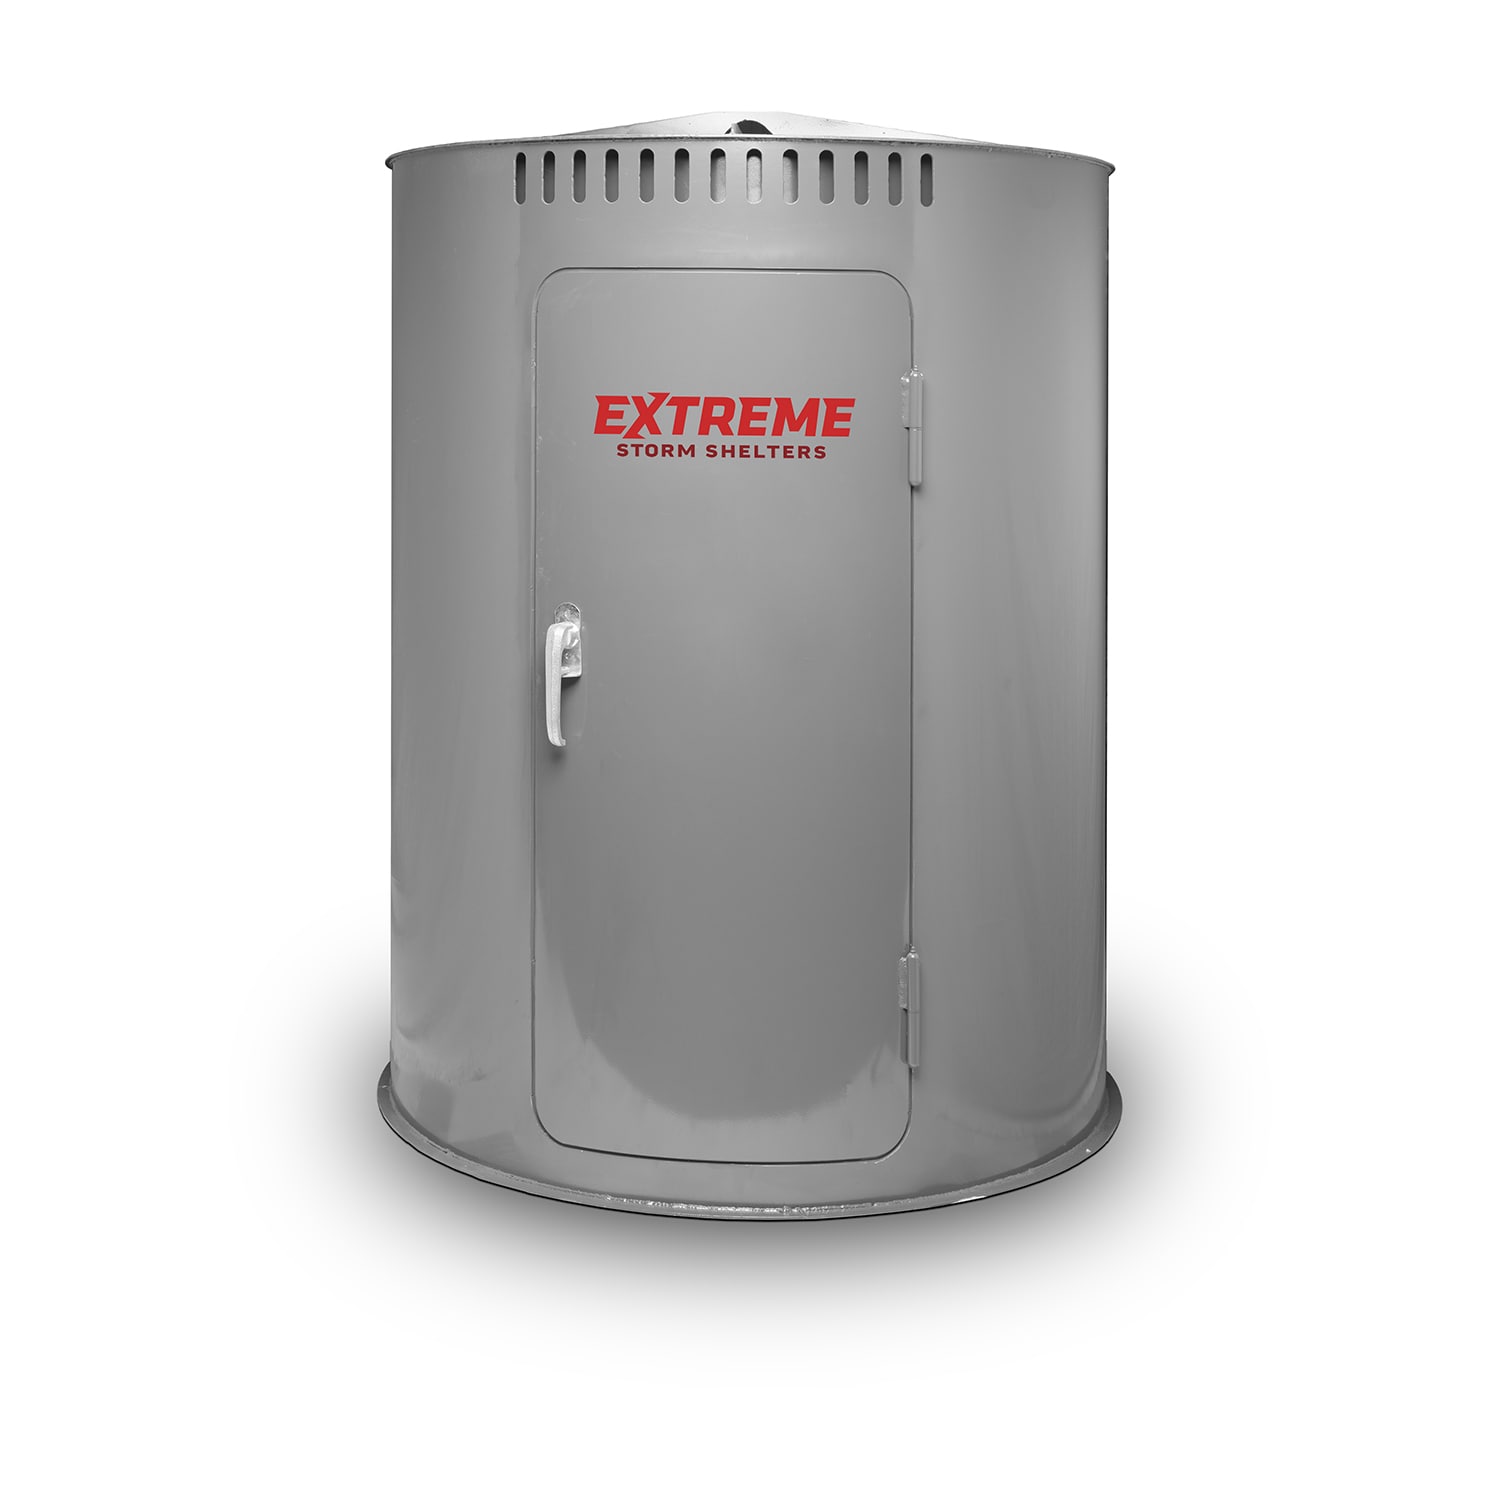 Extreme Storm Shelters Tornado Shelters at